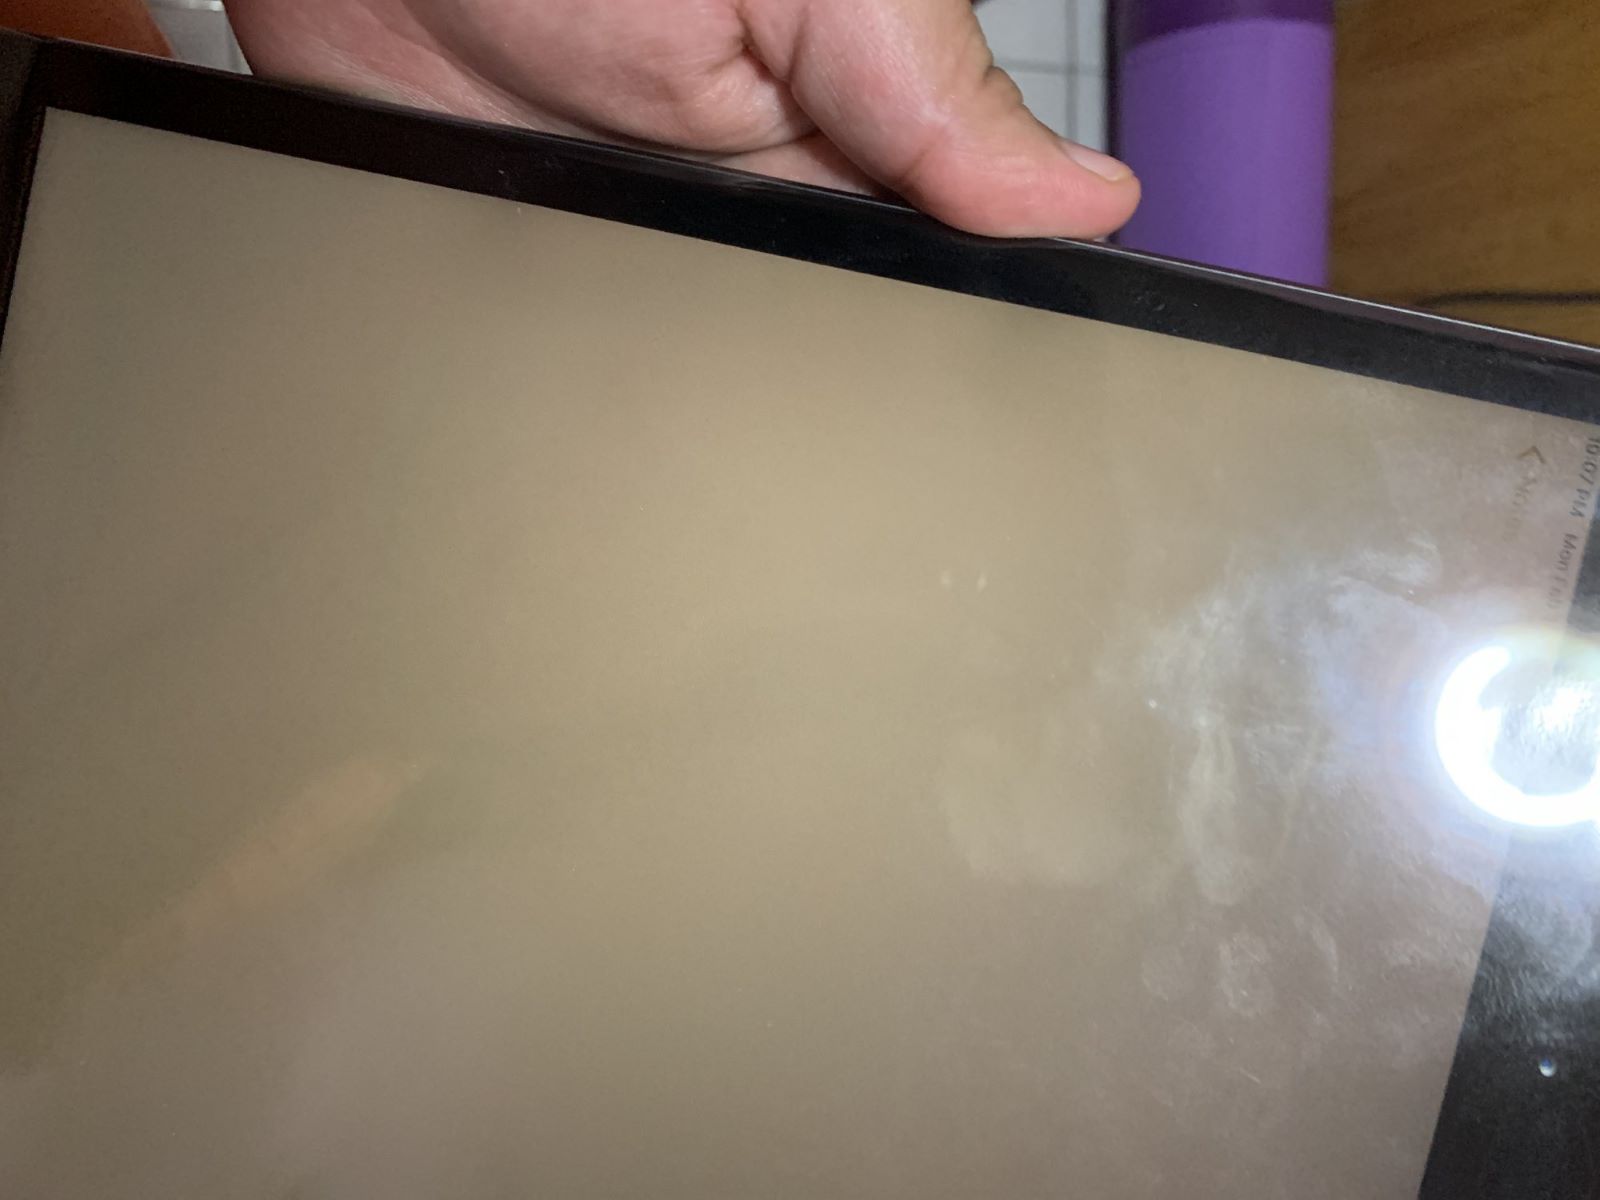 IPad Screen Went Dark: Here’s What You Need To Do!